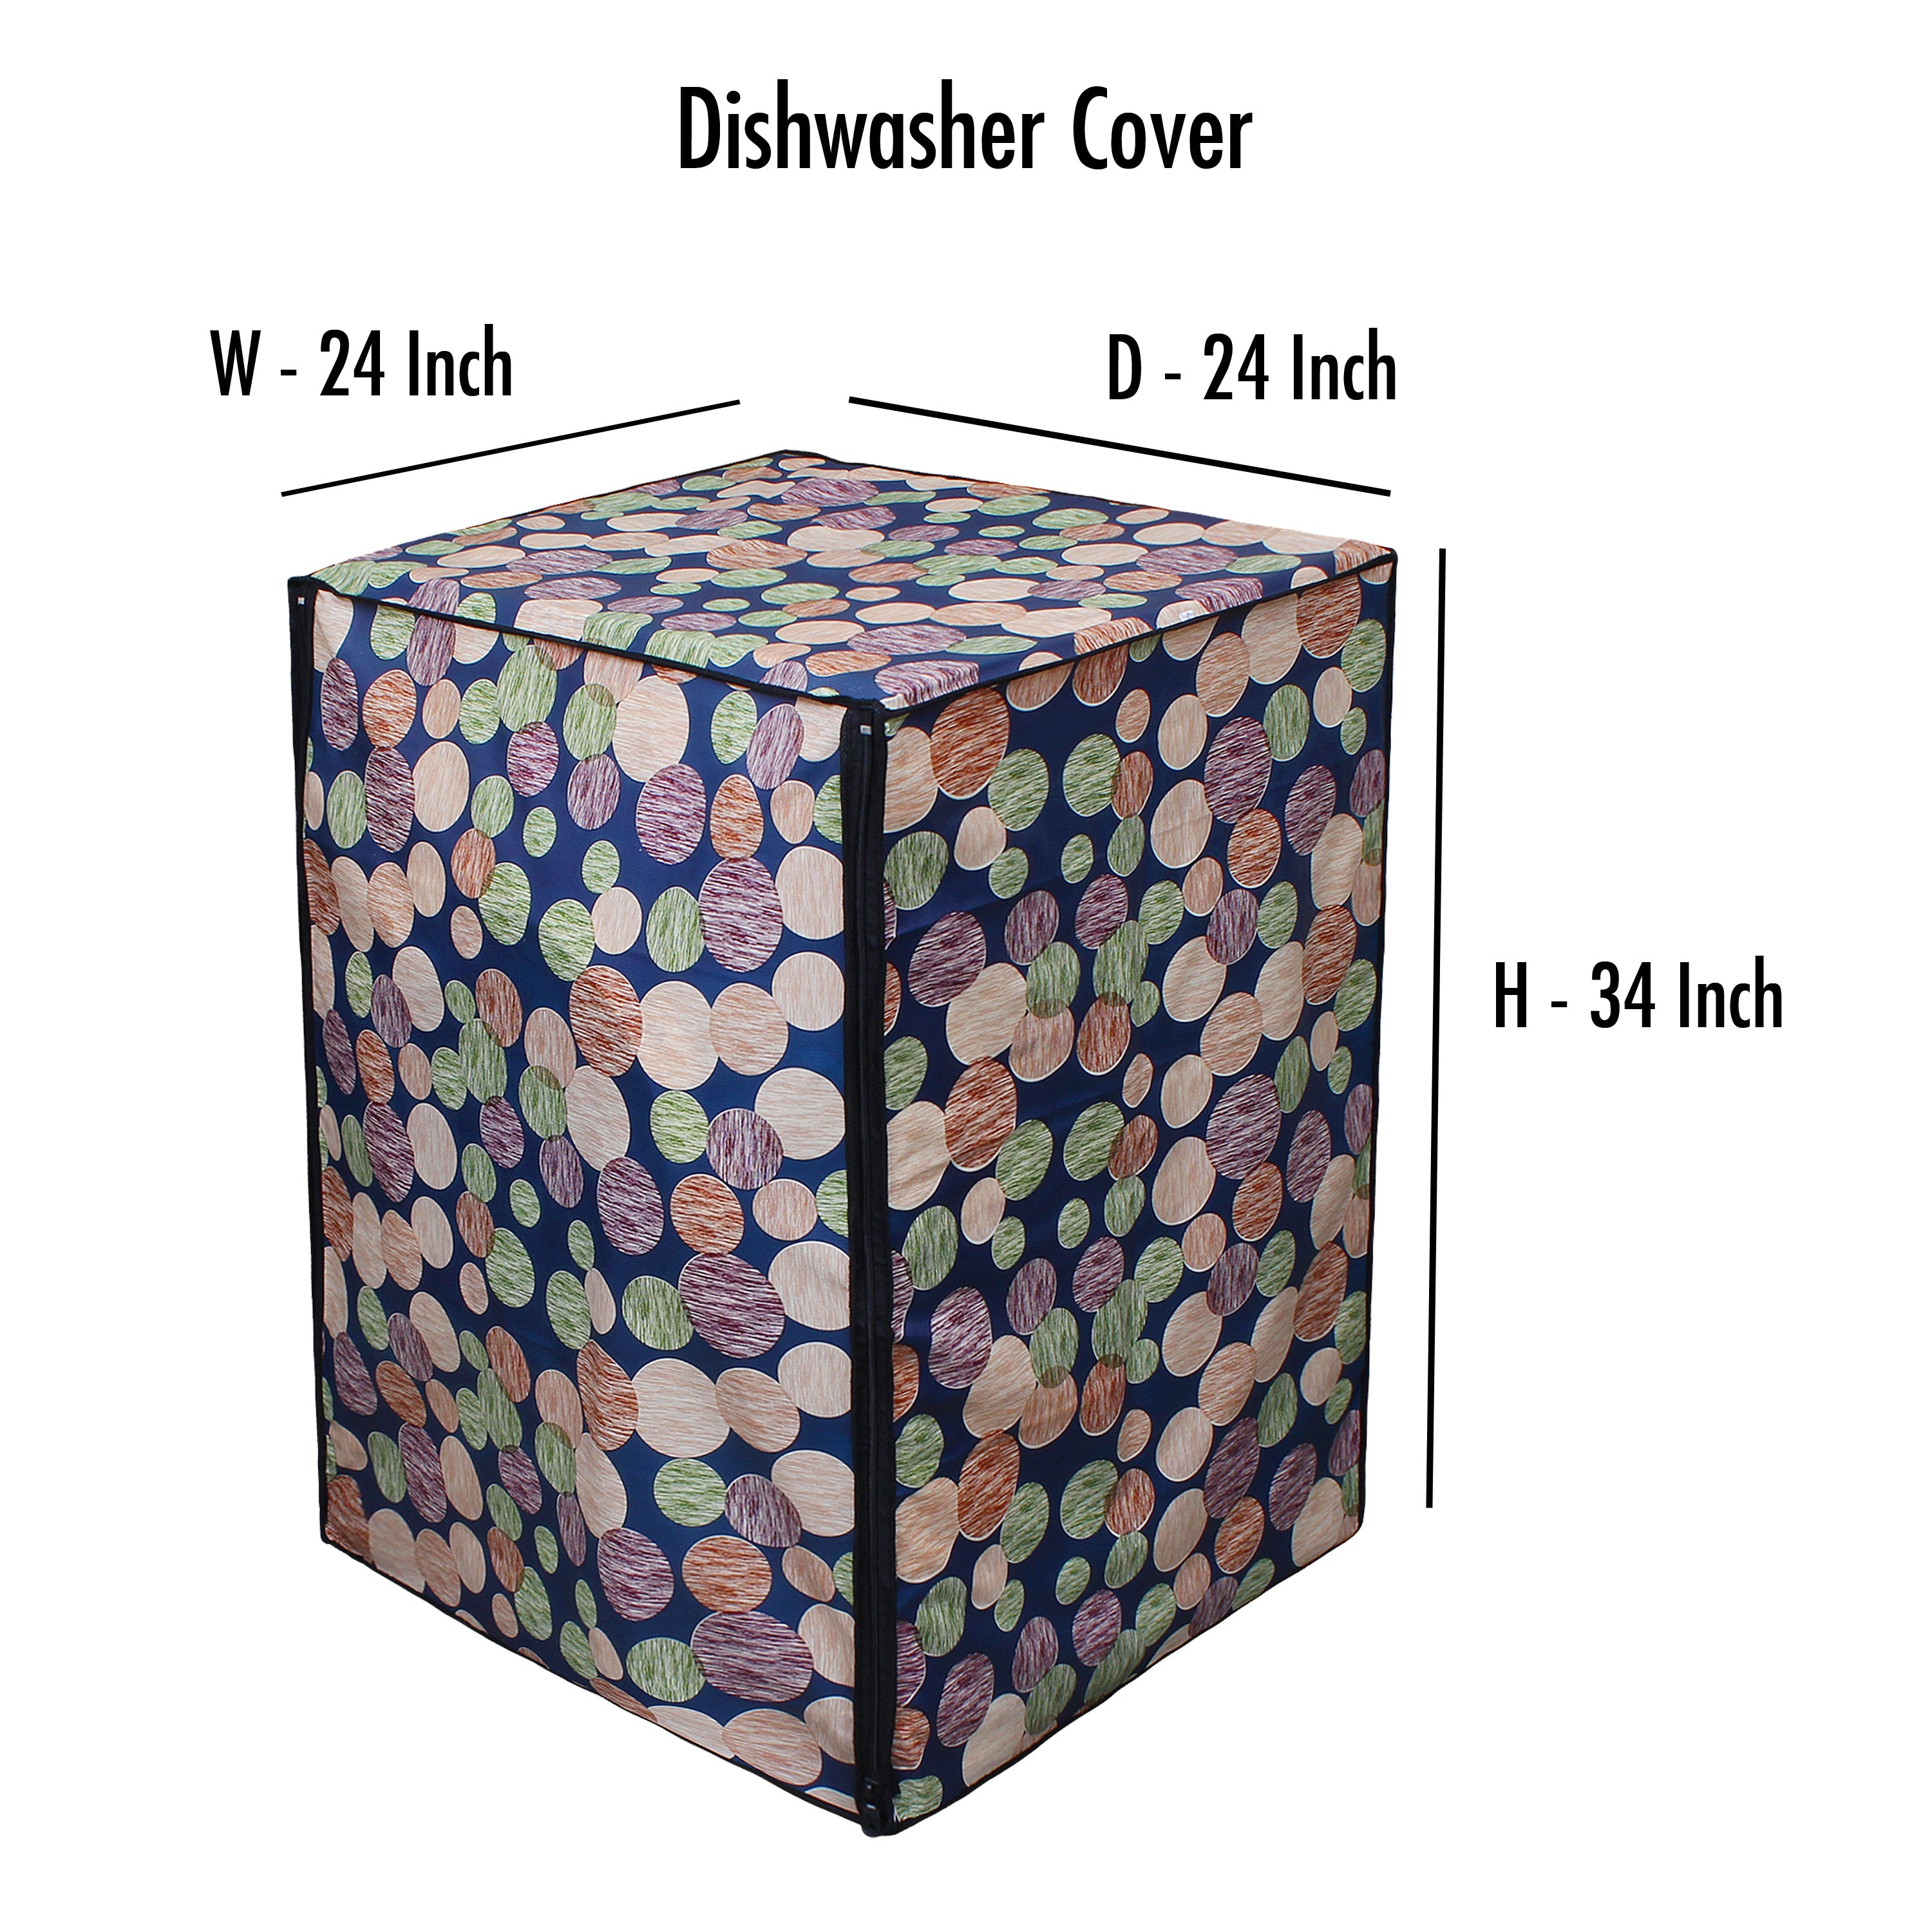 Waterproof and Dustproof Dishwasher Cover, SA71 - Dream Care Furnishings Private Limited